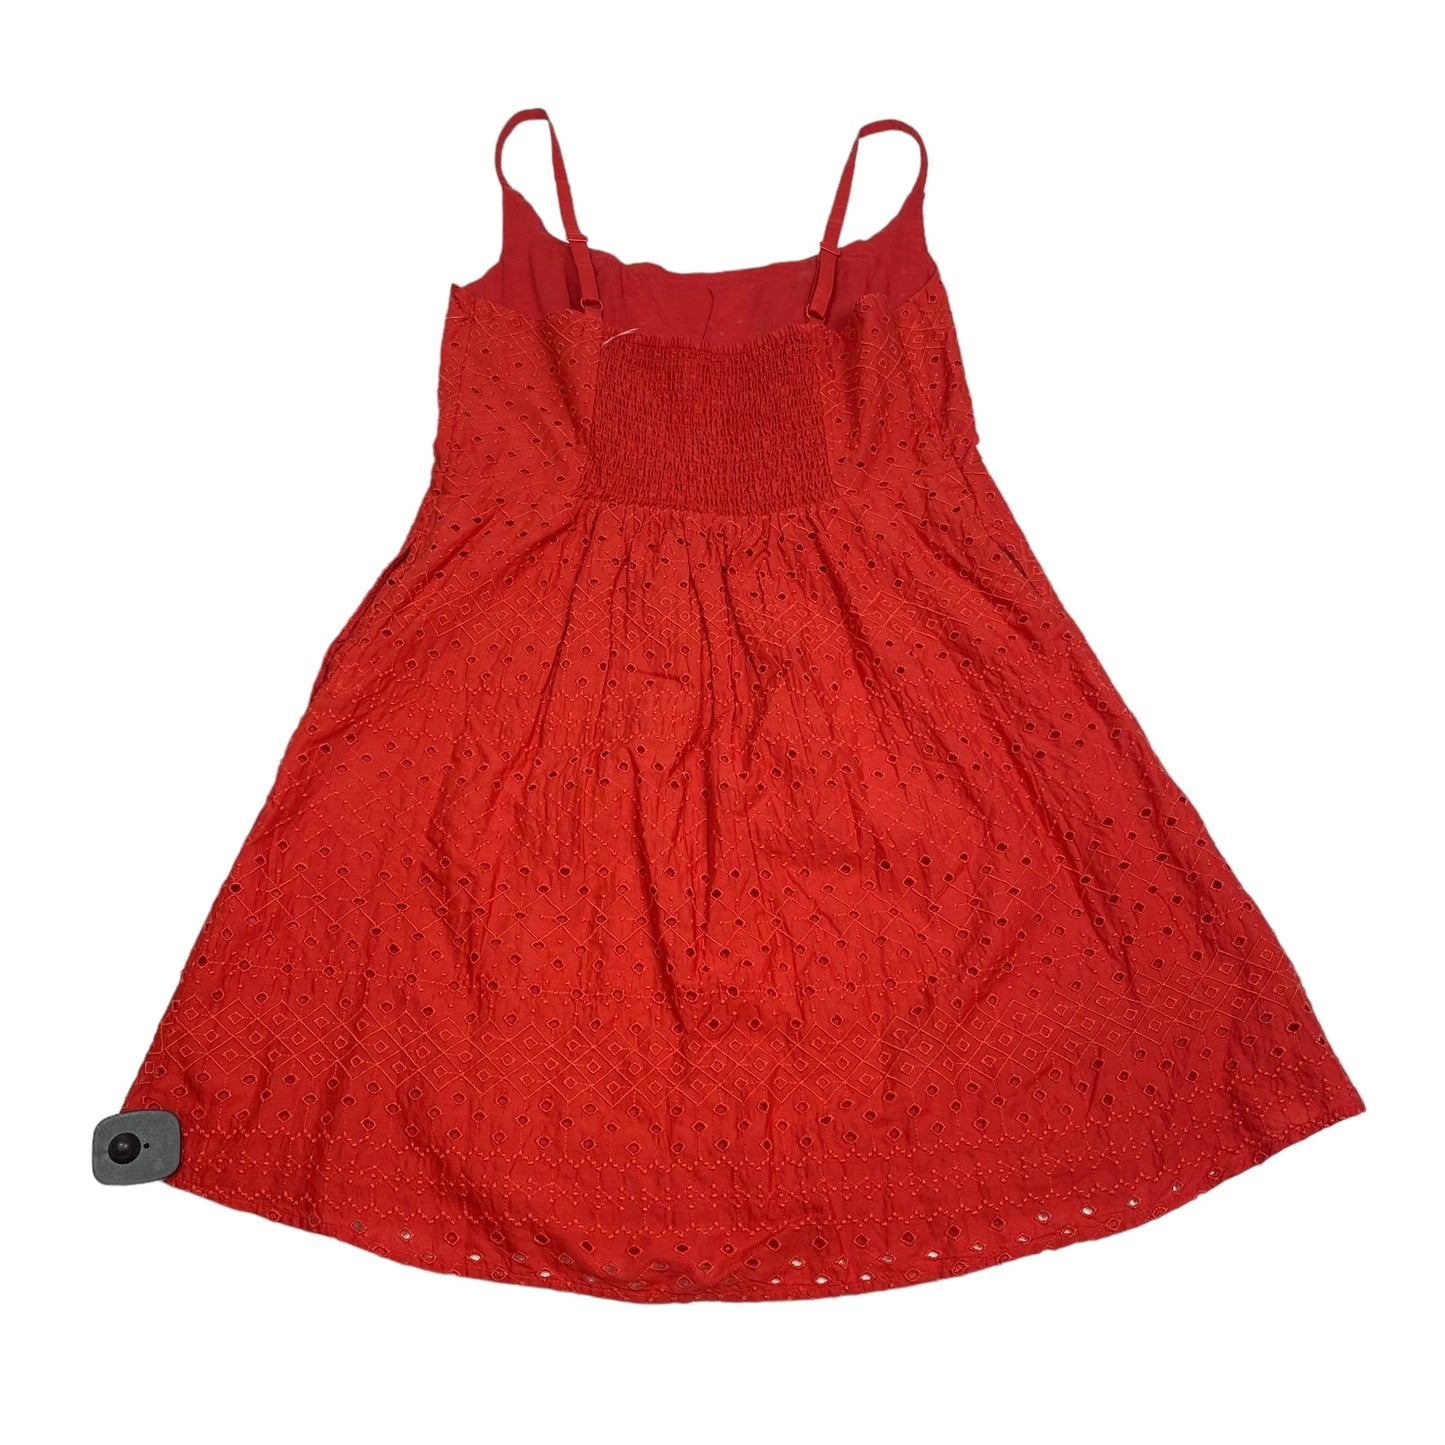 Red Dress Casual Short Old Navy, Size M